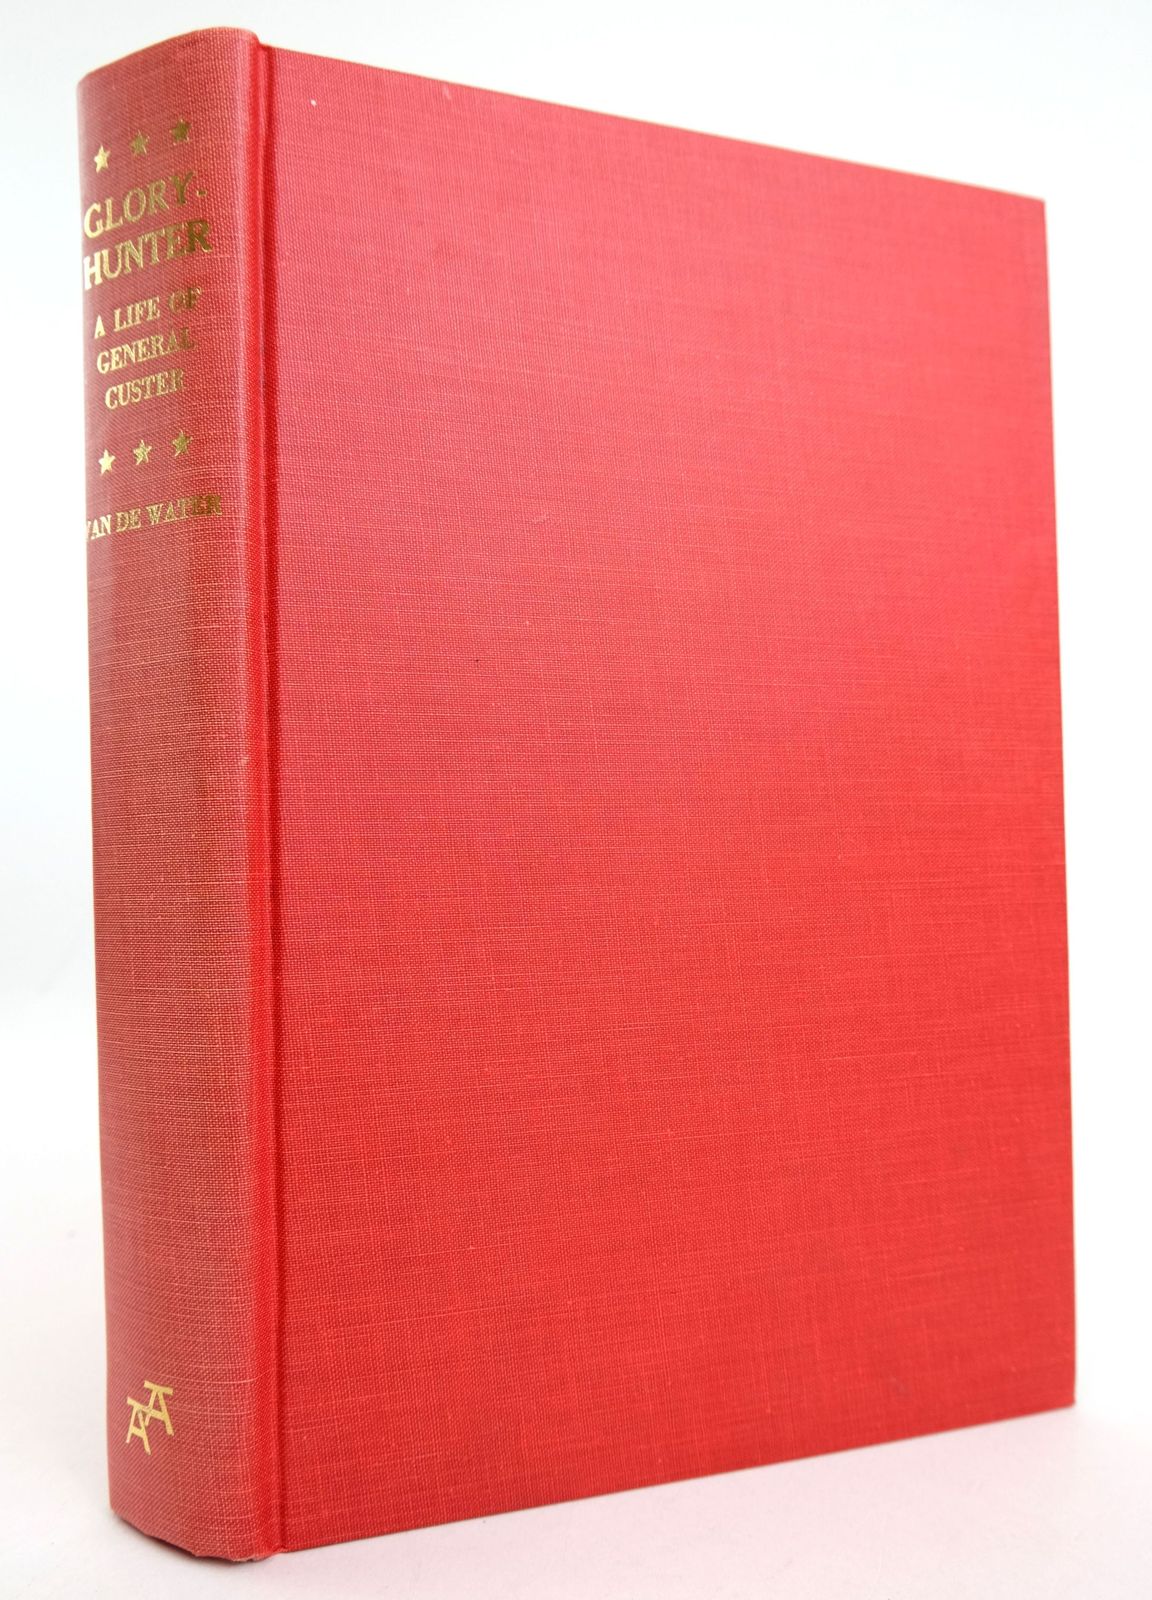 Photo of GLORY-HUNTER: A LIFE OF GENERAL CUSTER written by Van De Water, Frederic F. published by Argosy-Antiquarian Ltd. (STOCK CODE: 1818935)  for sale by Stella & Rose's Books